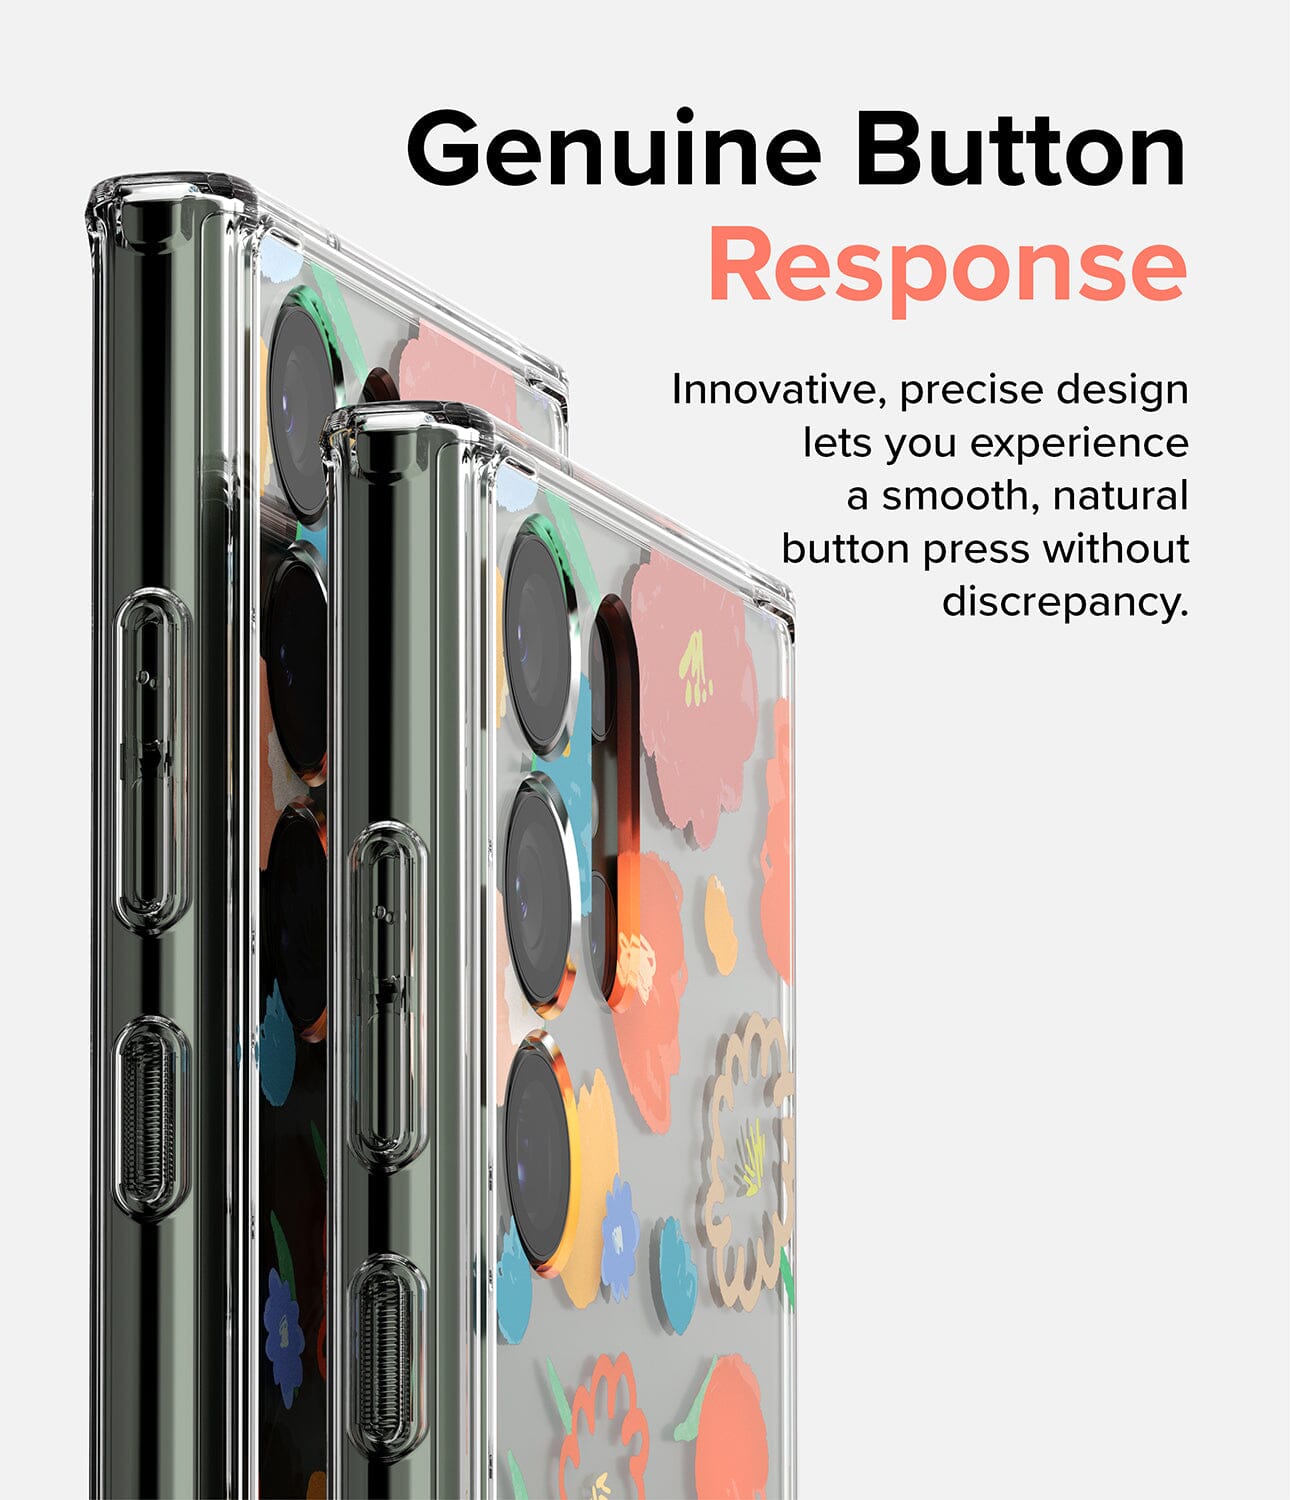 Ringke Fusion Design Case for Samsung Galaxy S23/ S23 Plus/ S23 Ultra Ringke 